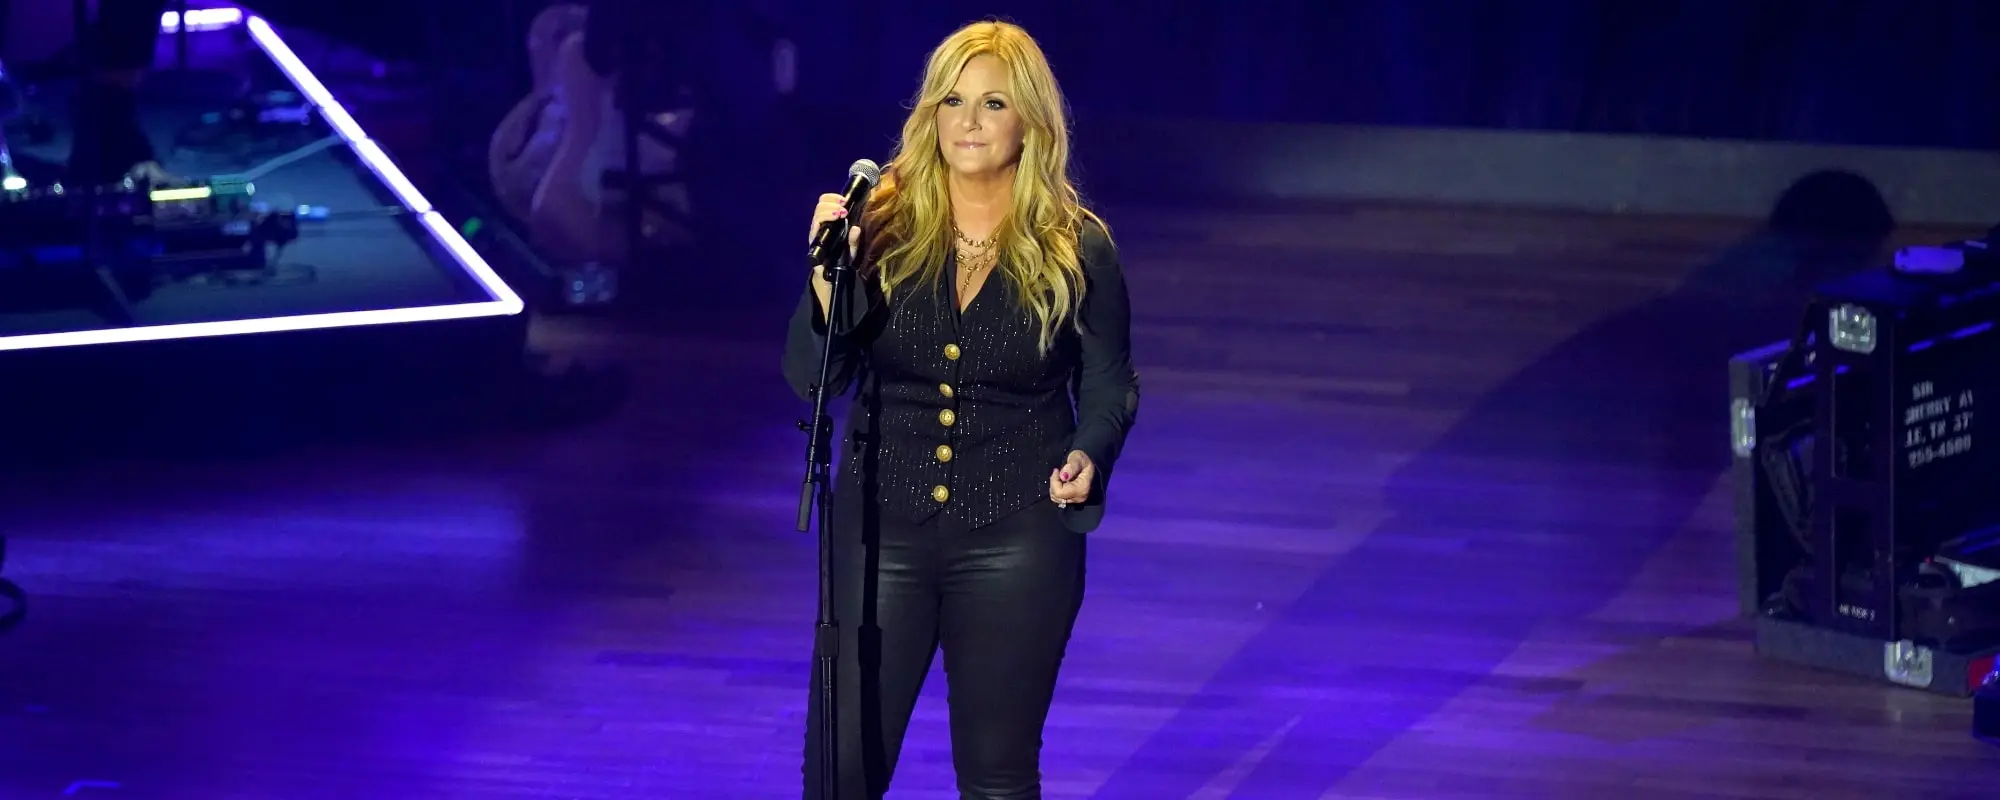 Trisha Yearwood Celebrating 25 Years as Grand Ole Opry Member With Pam Tillis, Terri Clark, and More